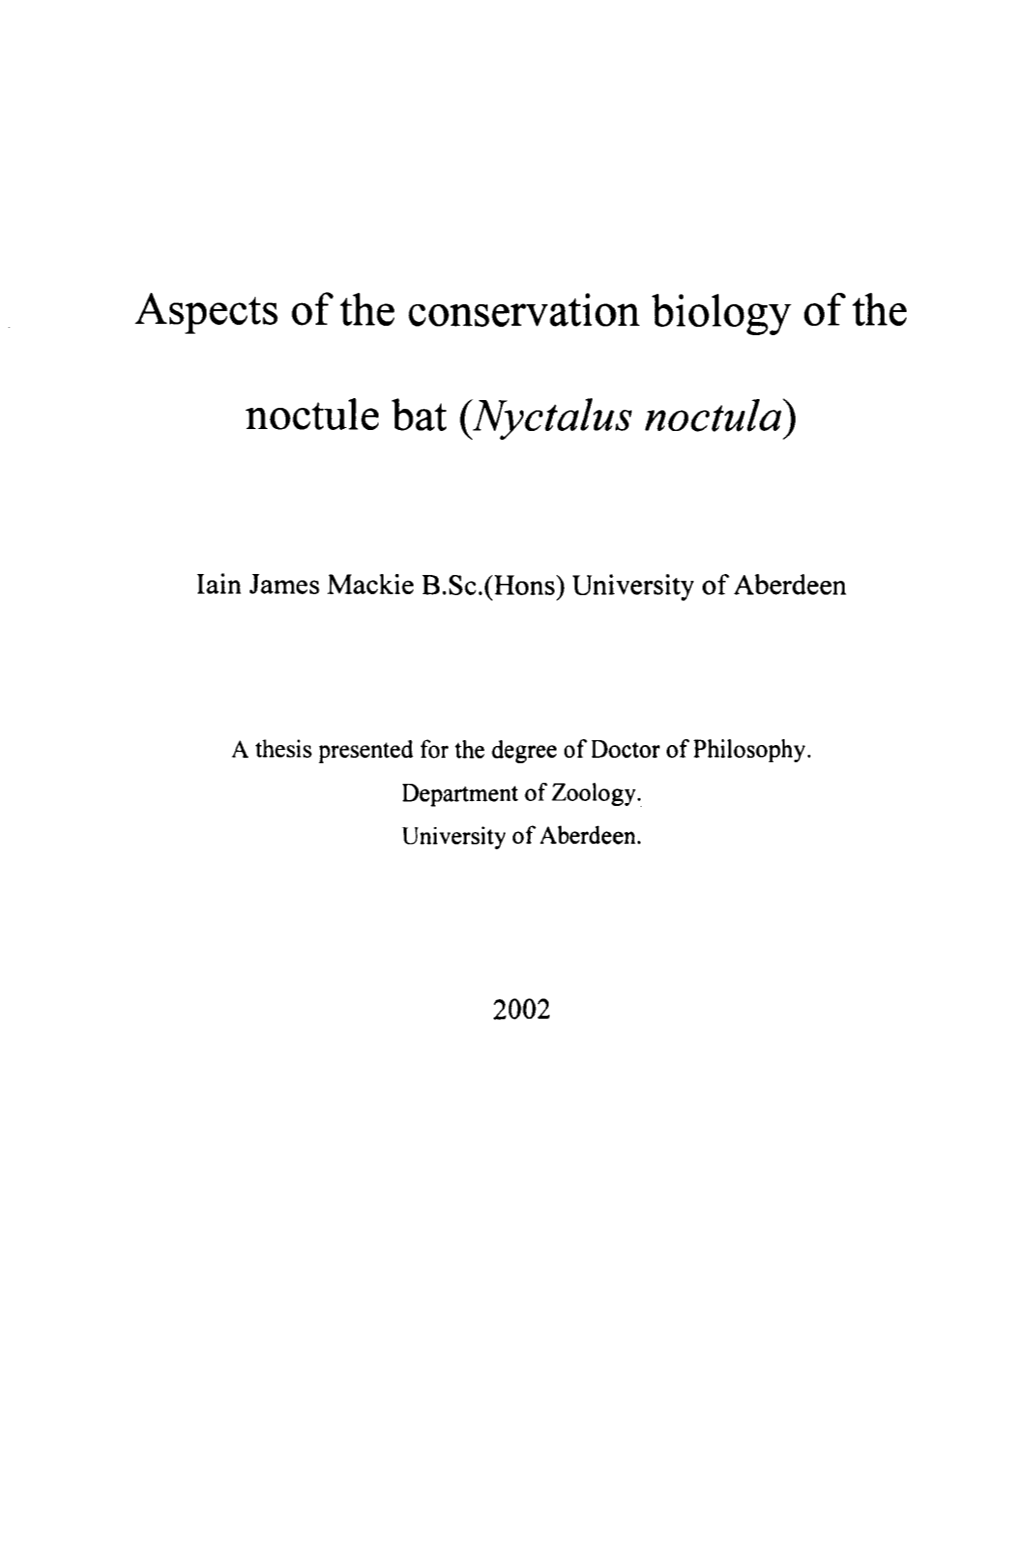 Aspects of the Conservation Biology of the Noctule